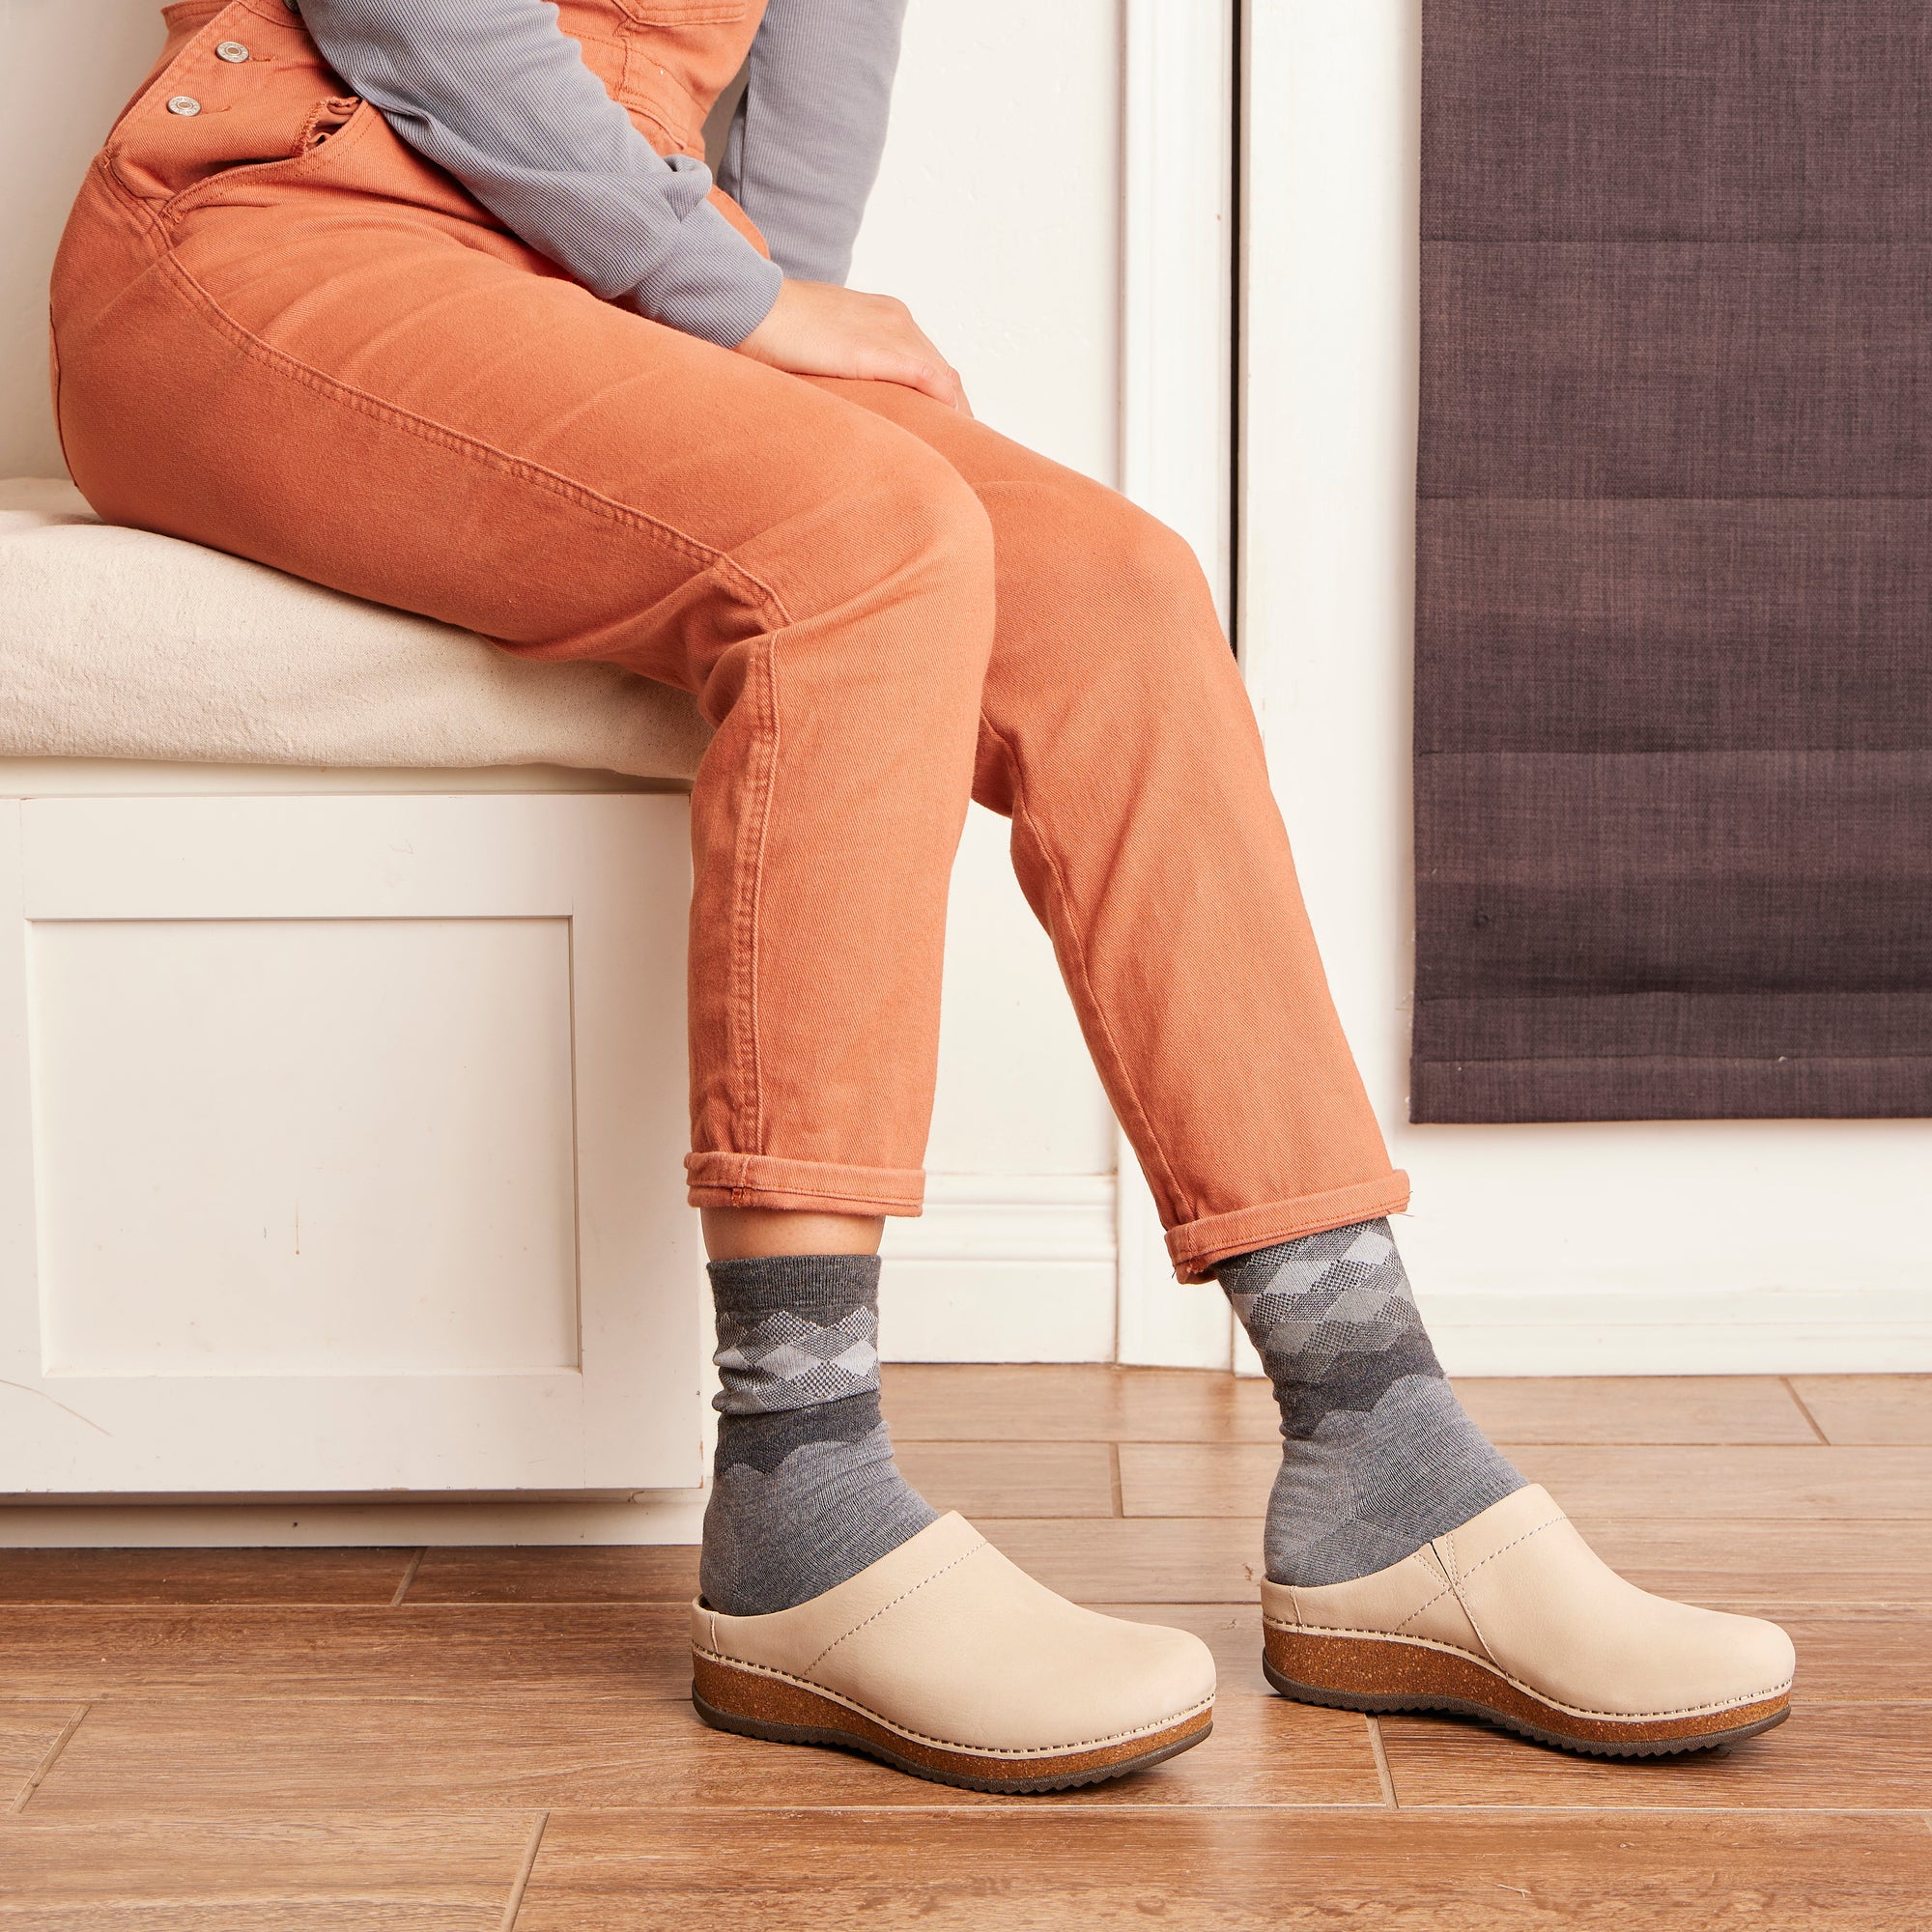 A cozy outfit with patterned socks and light tan mule clogs that have a cork-based outsole.